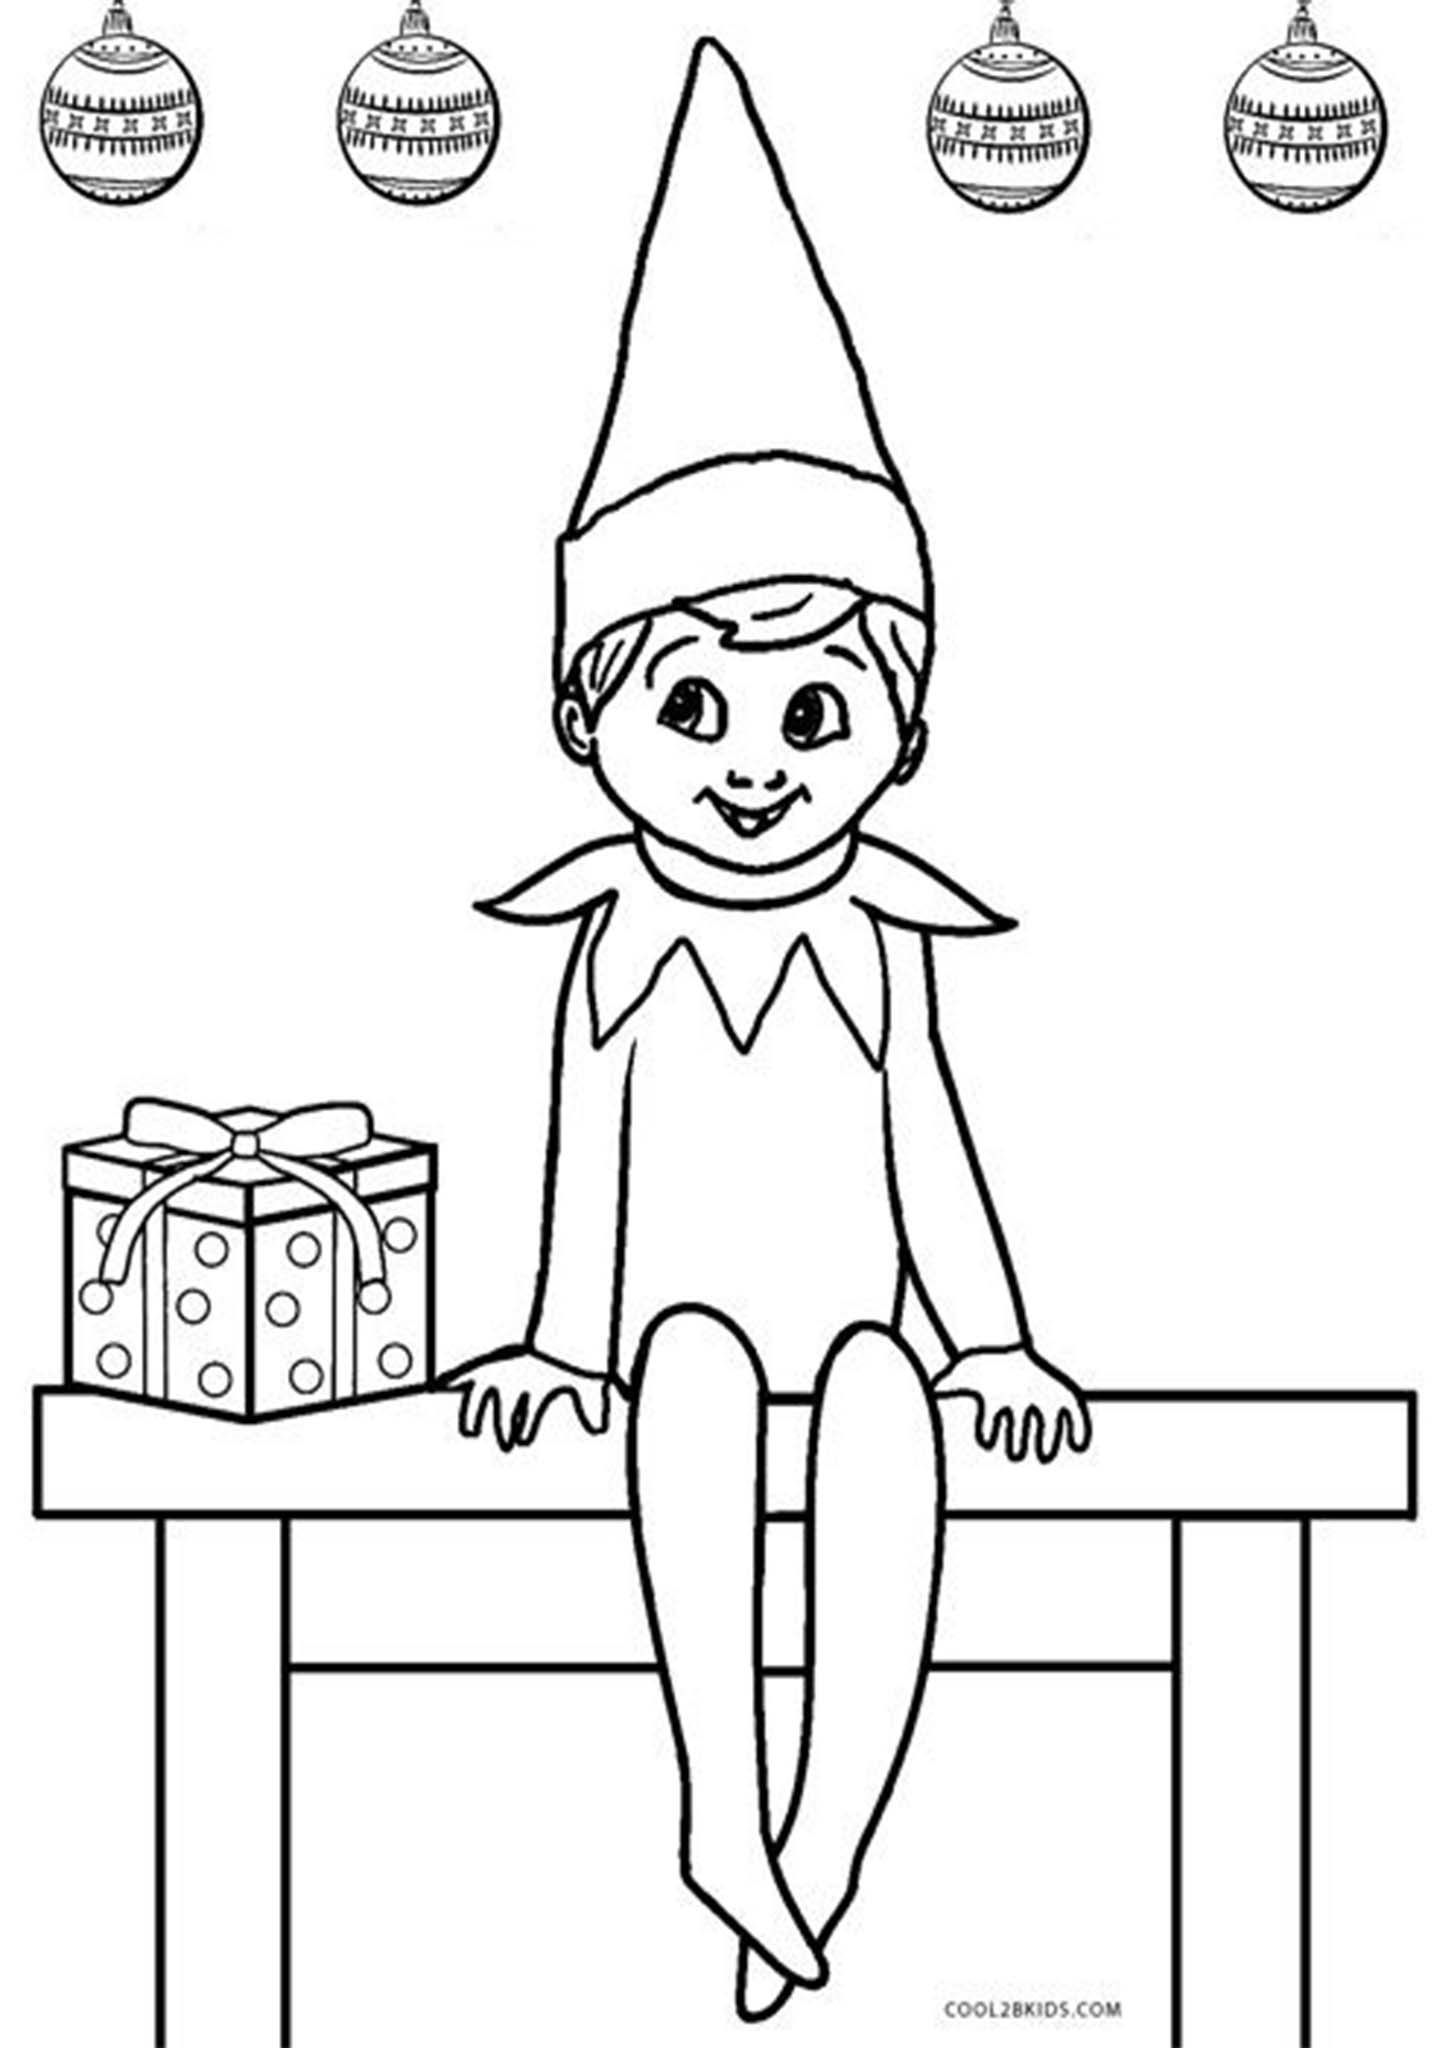 Free printable elf on the shelf coloring pages printable christmas coloring pages christmas coloring sheets christmas coloring pages